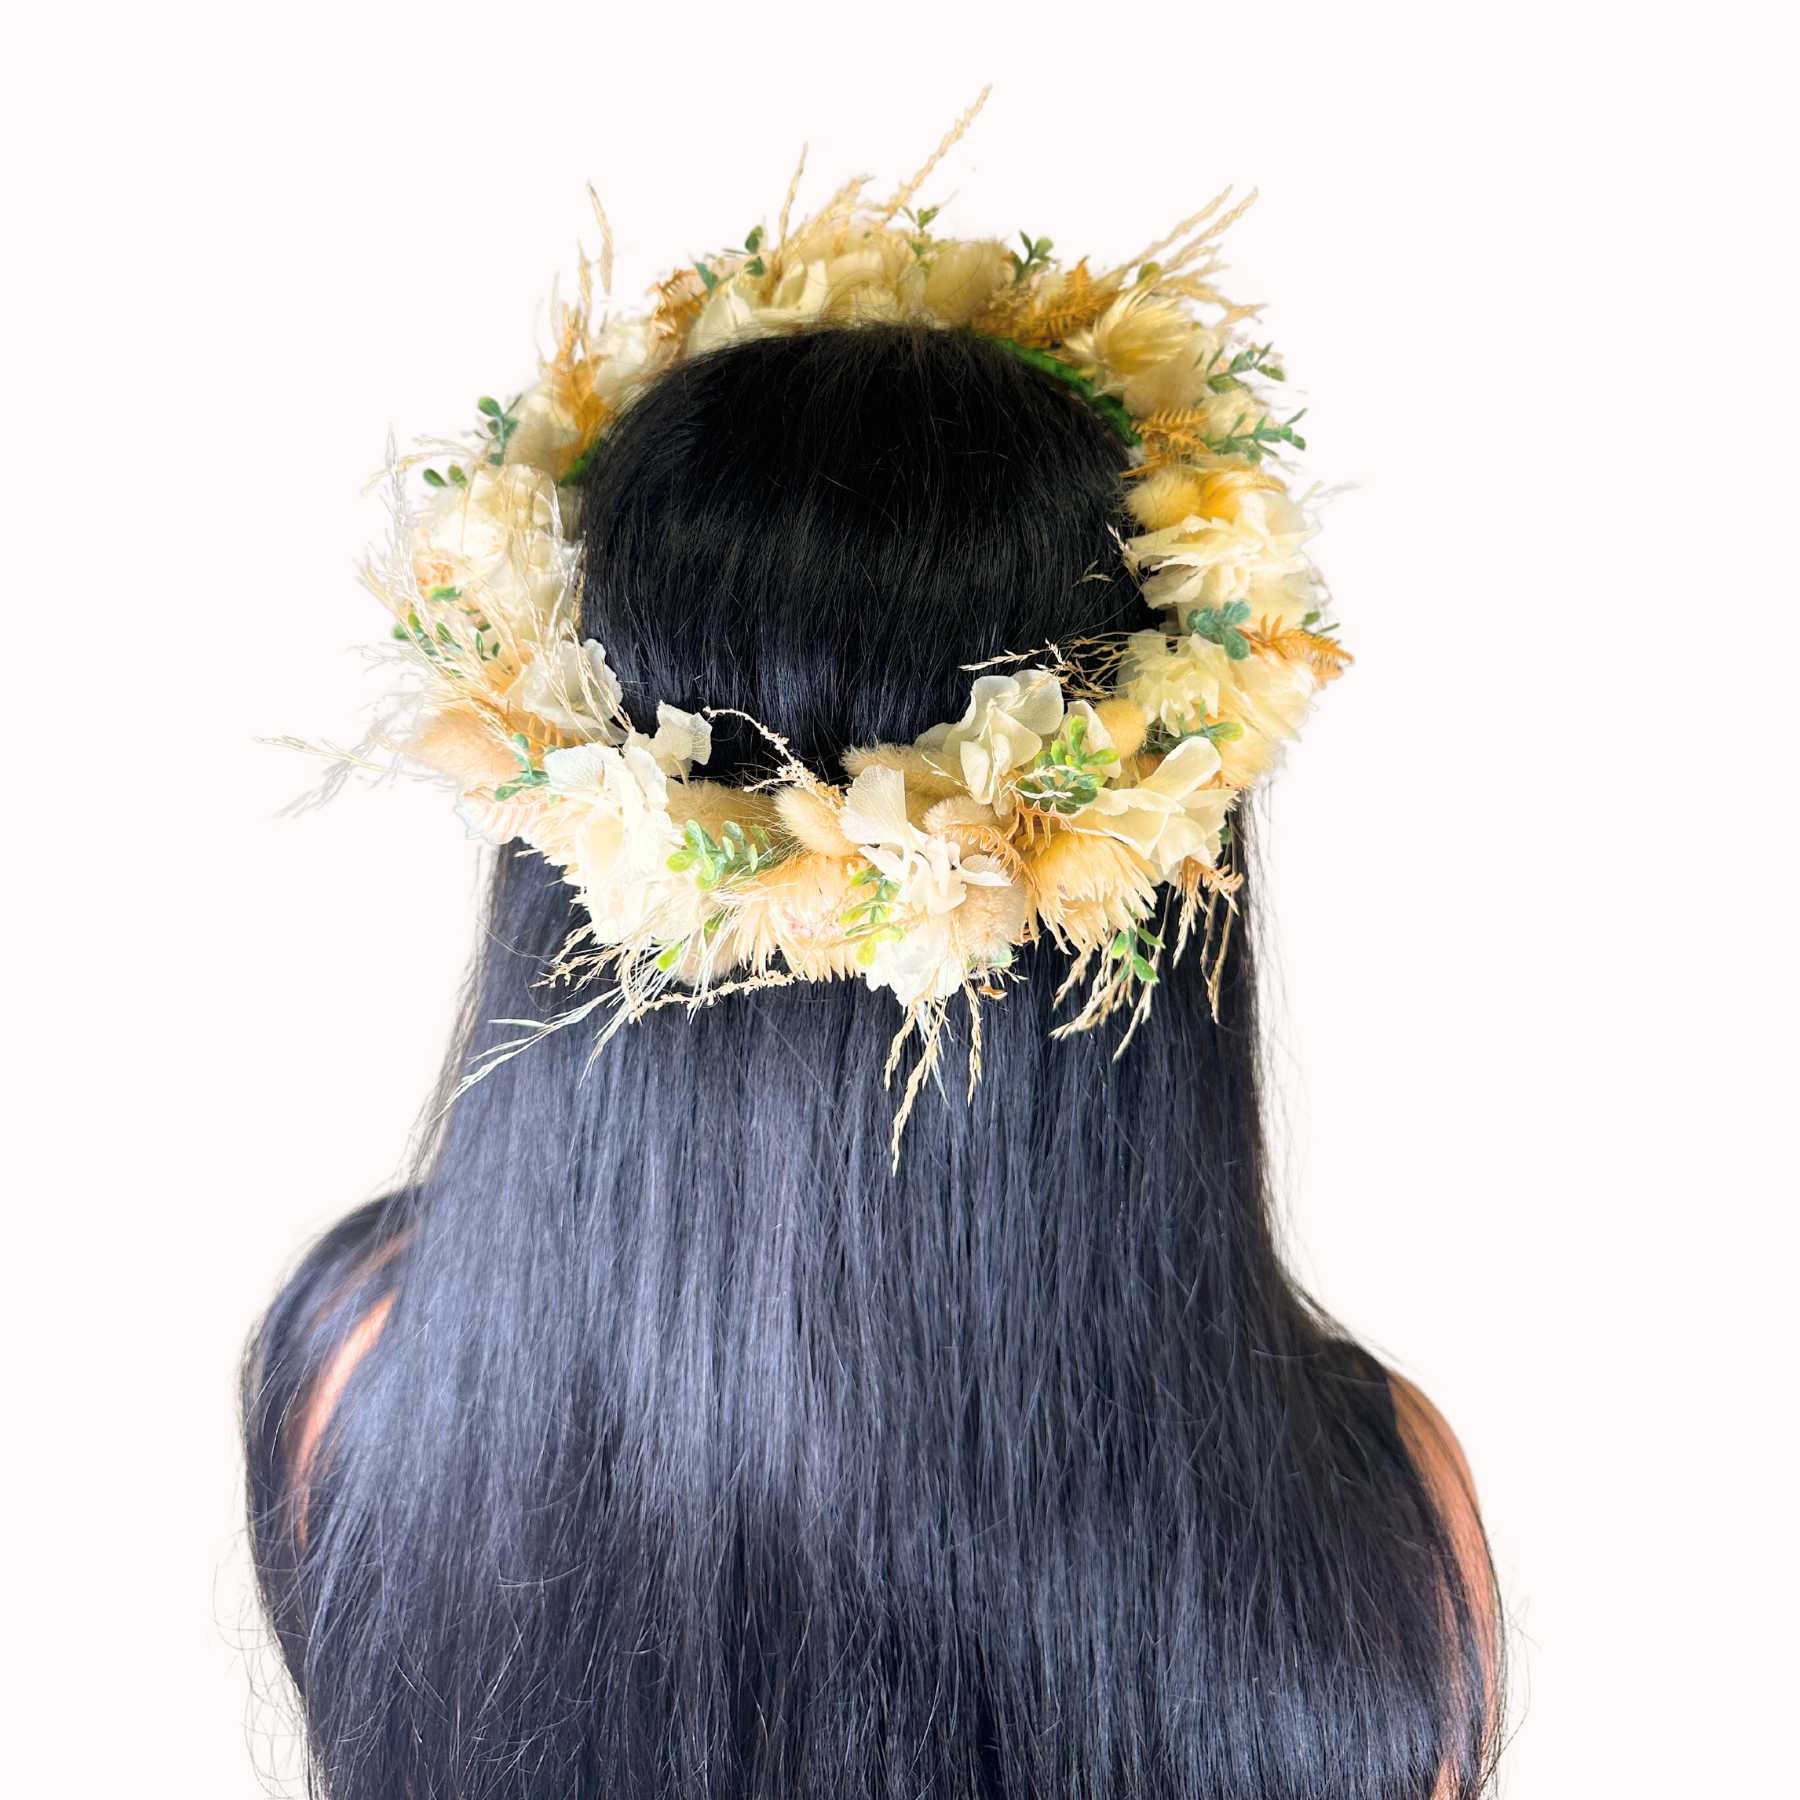 Back view of a woman with long black hair wearing a floral crown made with delicate yellow and cream flowers.